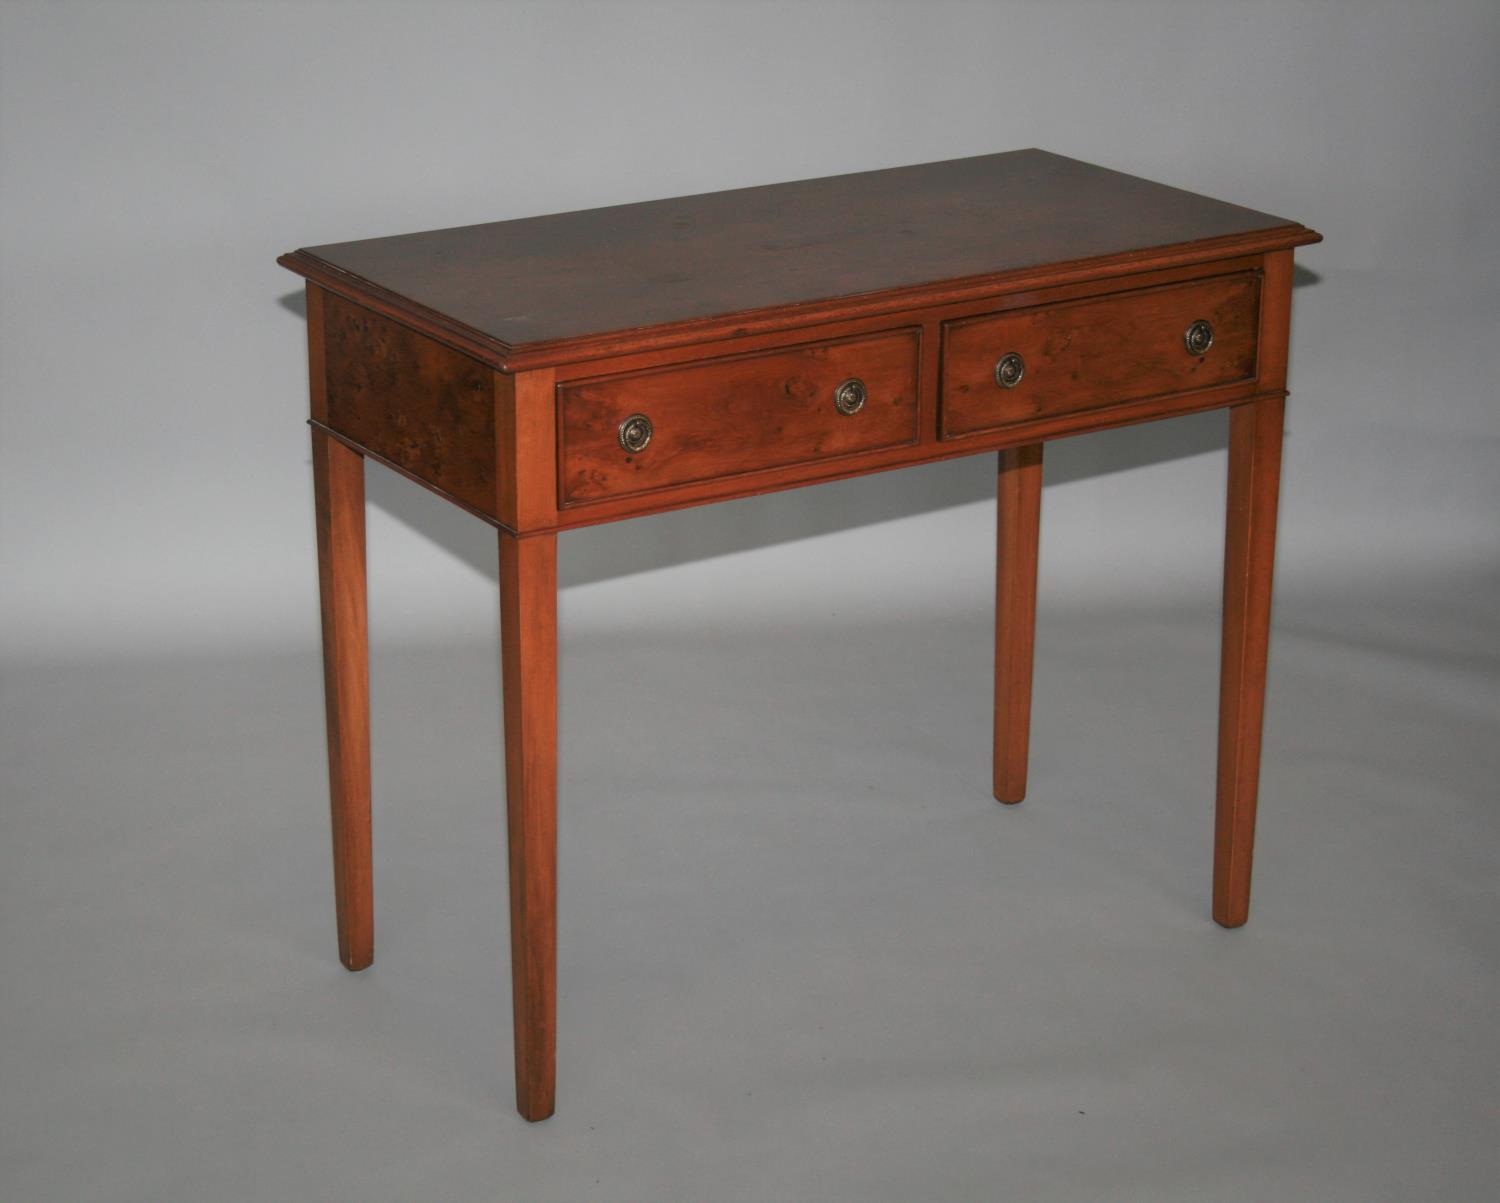 Yew wood sofa table and matching side table with two drawers 90 W x 75 H x 50 D and 90 W x 75 H x 45 - Image 2 of 3